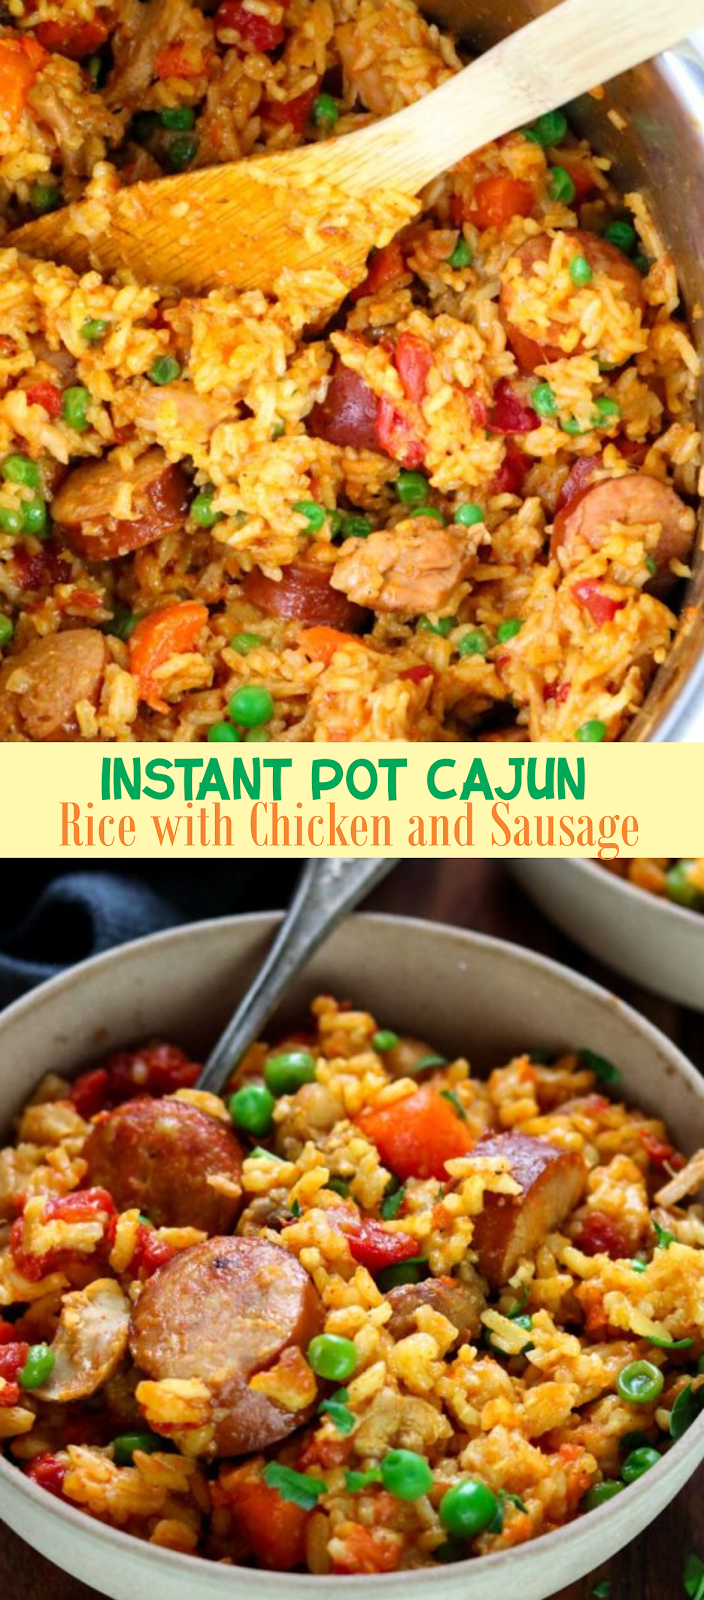 Instant Pot Cajun Rice with Chicken and Sausage | EAT